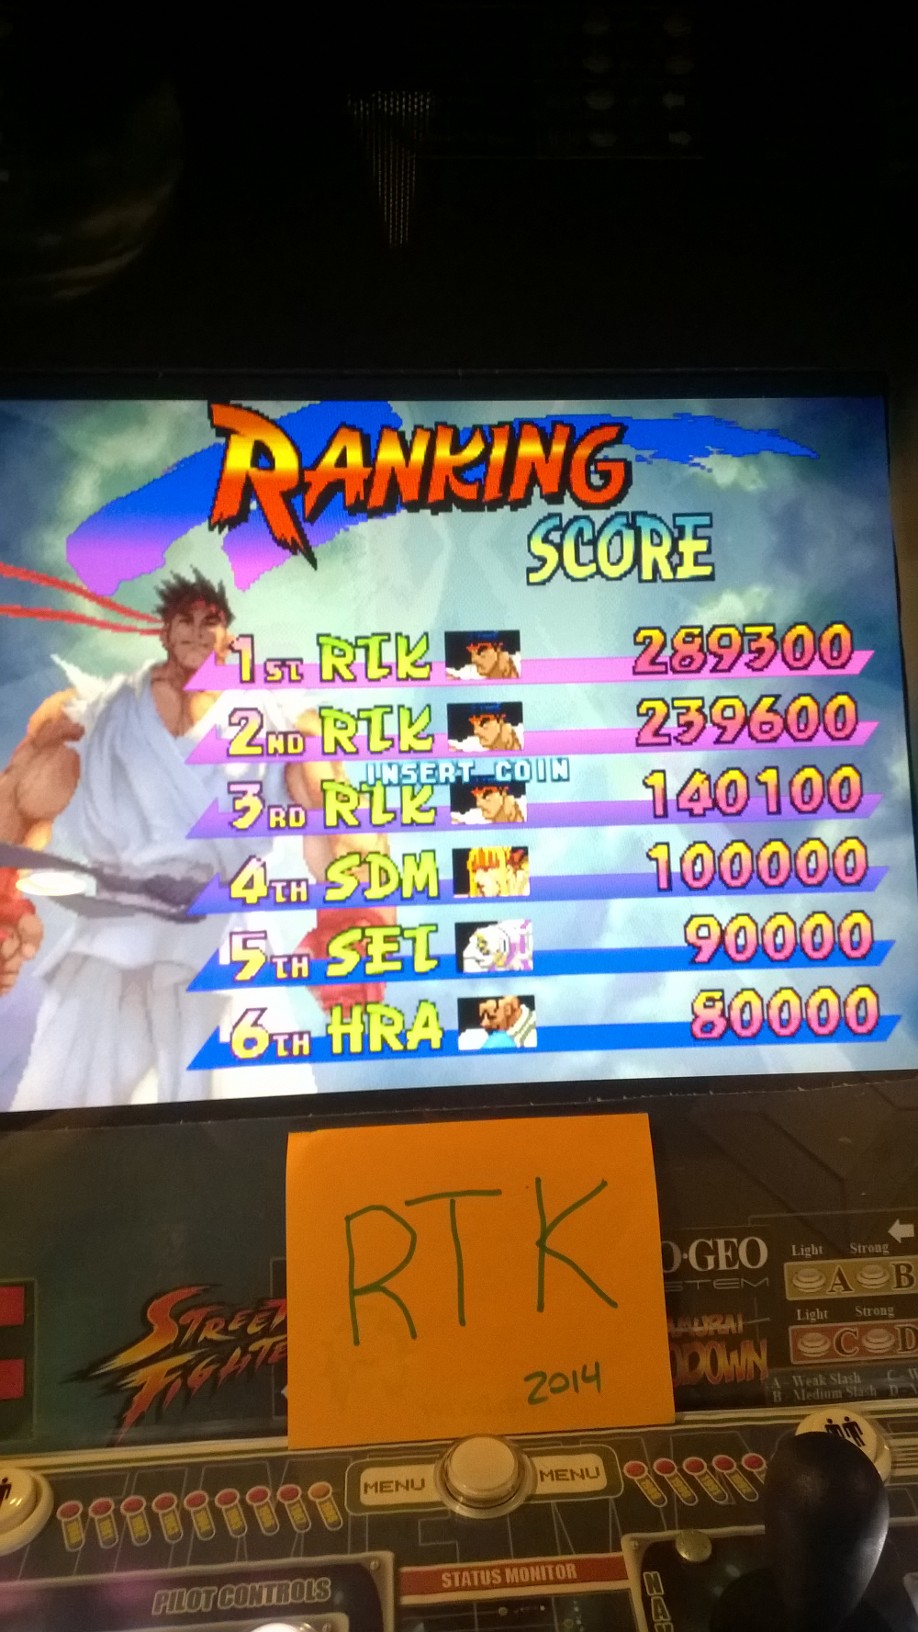 rtkiii: Street Fighter III: New Generation [sfiii] (Arcade Emulated / M.A.M.E.) 289,300 points on 2014-05-13 05:46:24